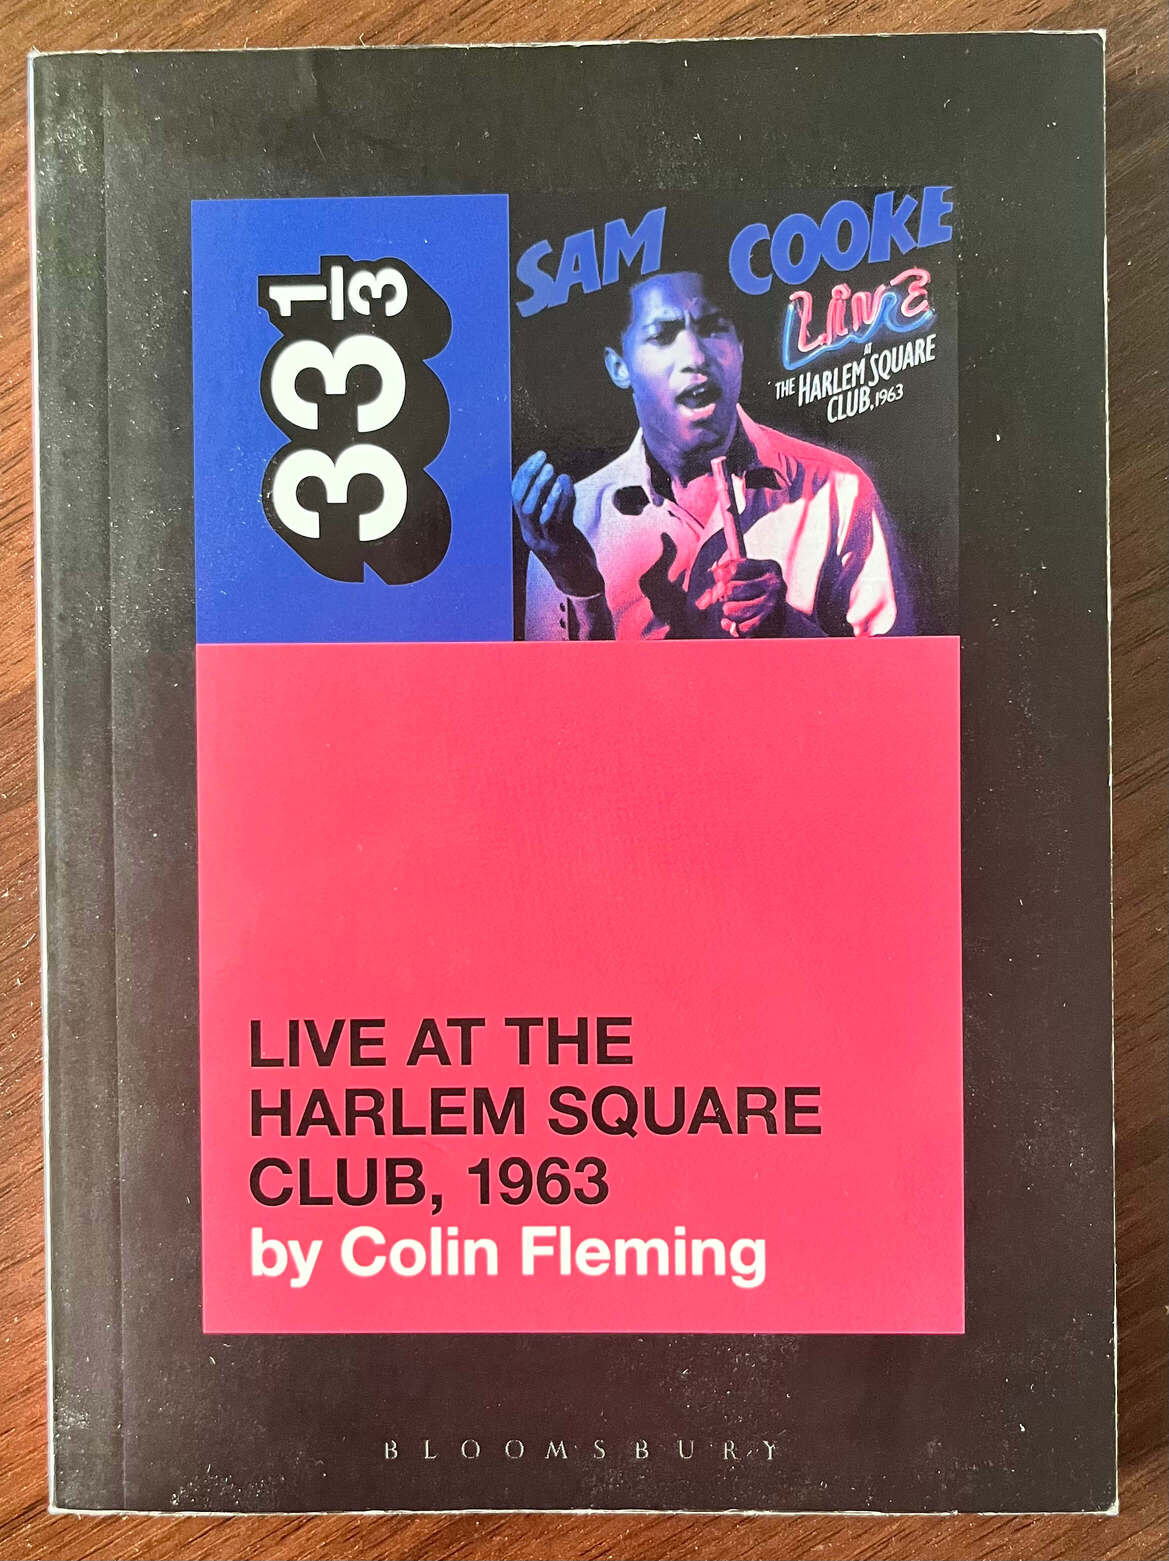 “Sam Cooke: Live at the Harlem Square Club, 1963” by Colin Fleming.